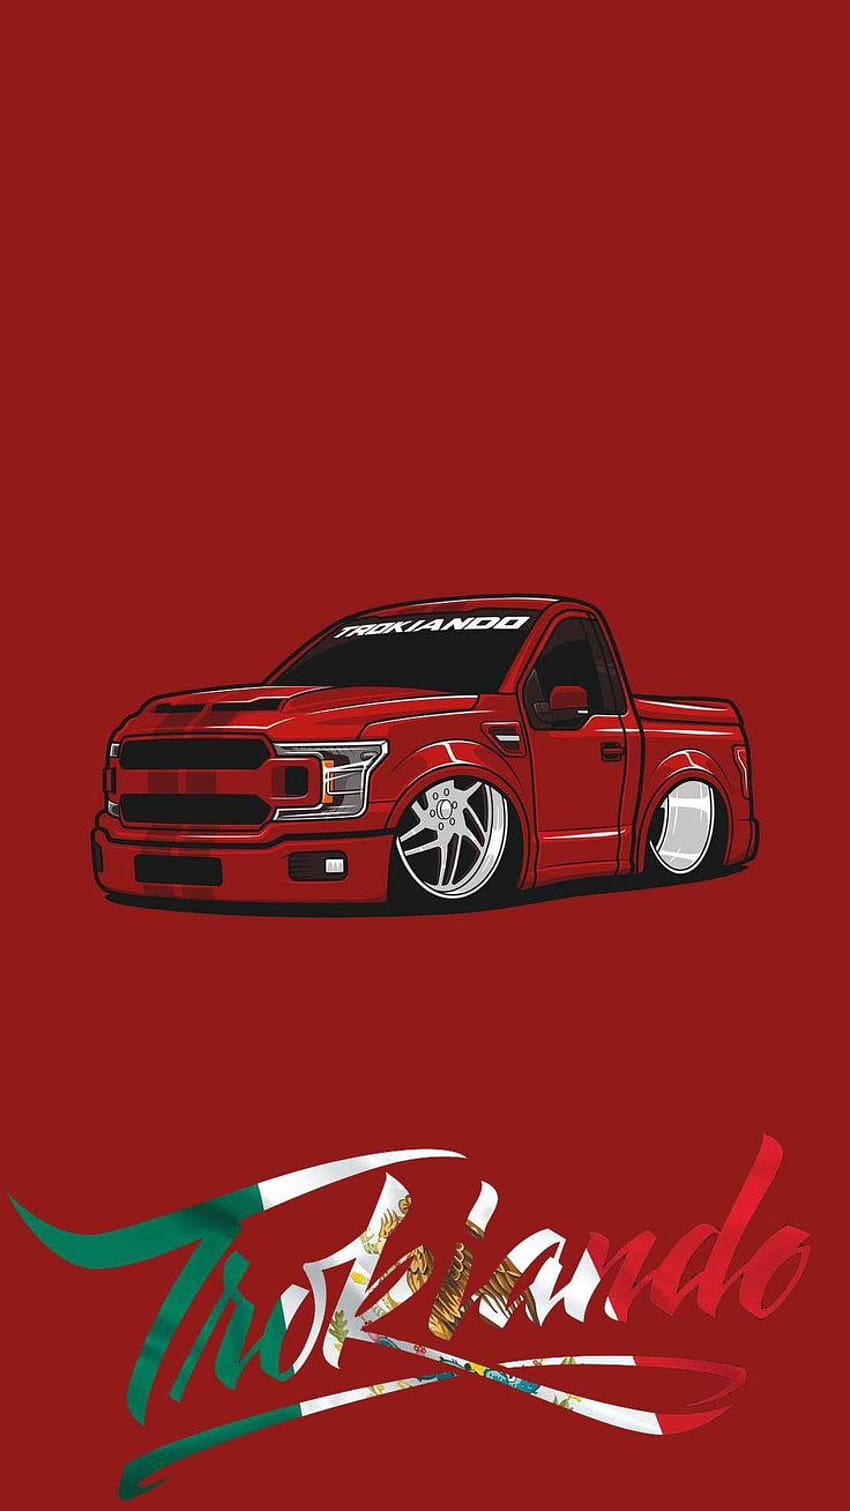 Takuache Wallpapers Discover more Chevy Truck Takuache Takuache Truck  Takuache Trucks Trokiando wallpaper htt  Dropped trucks Mexico  wallpaper Chevy trucks